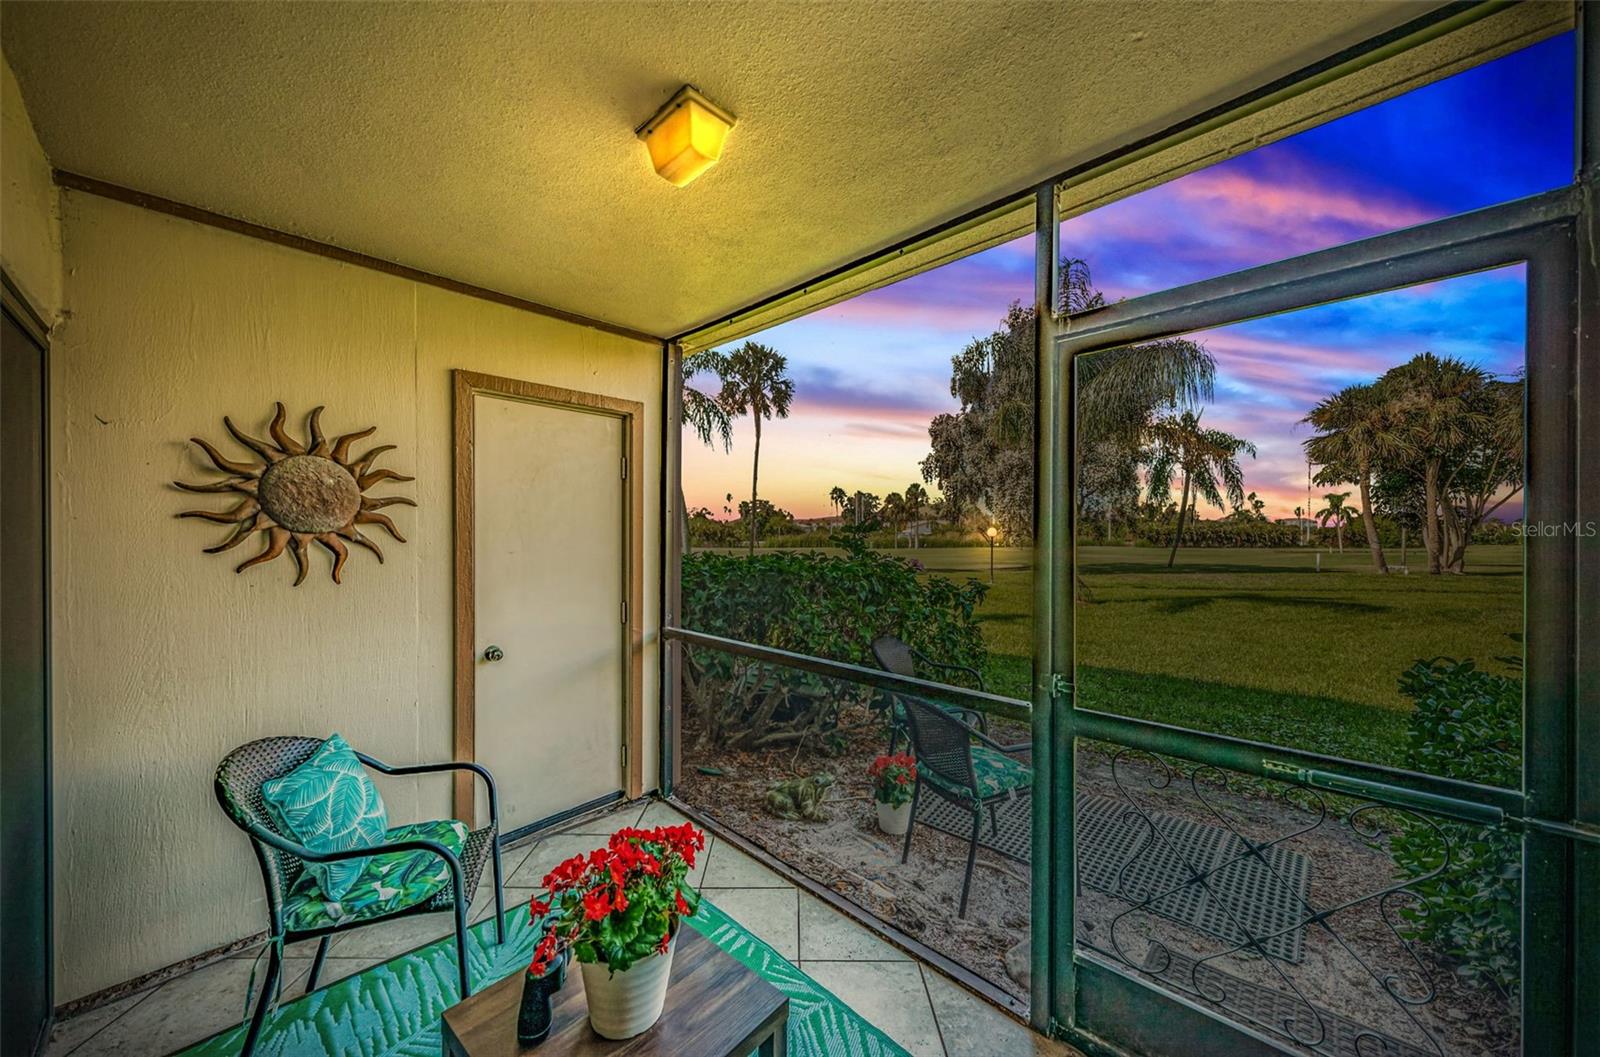 Experience breathtaking sunsets over the golf course from the comfort of your own patio - a perfect end to any day.